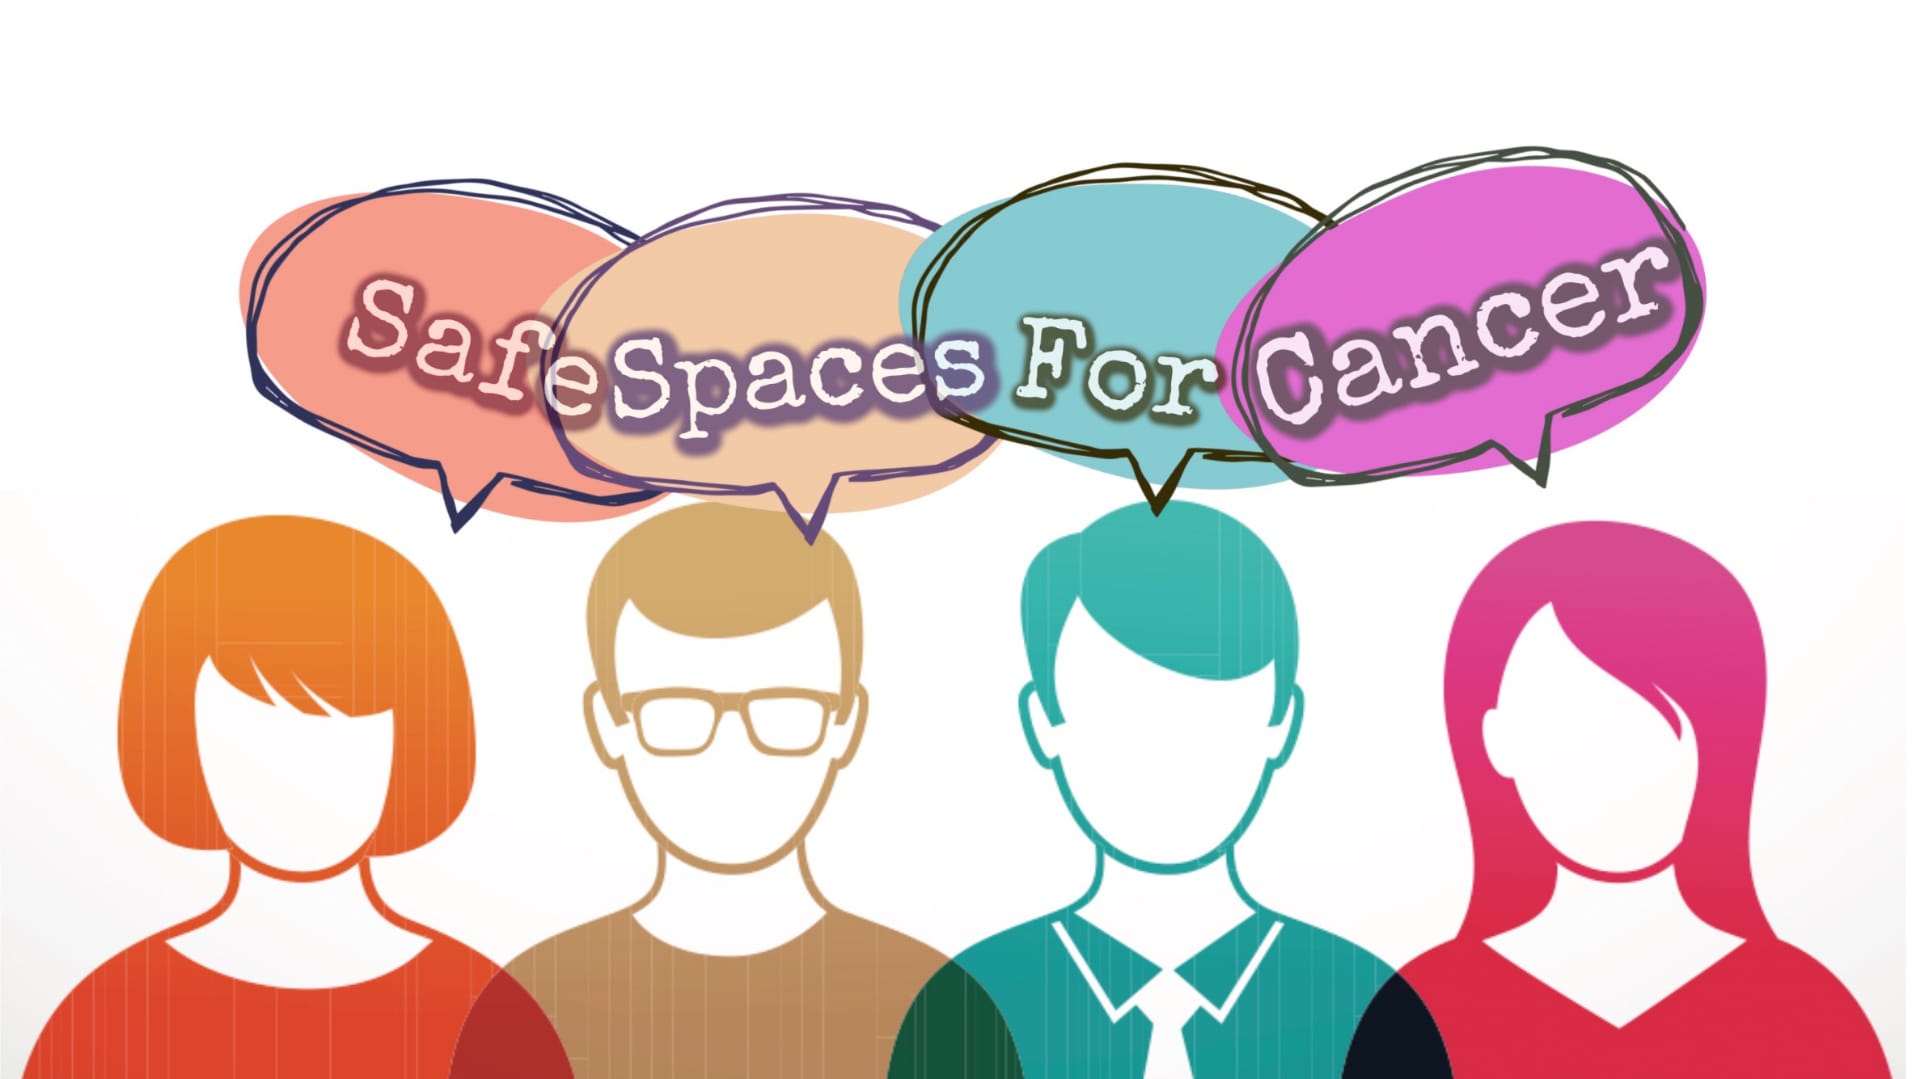 Safe Spaces for Cancer is the name of the project that won the Gulbenkian 25<25 Challenge in the “Health and Well-Being” category. 